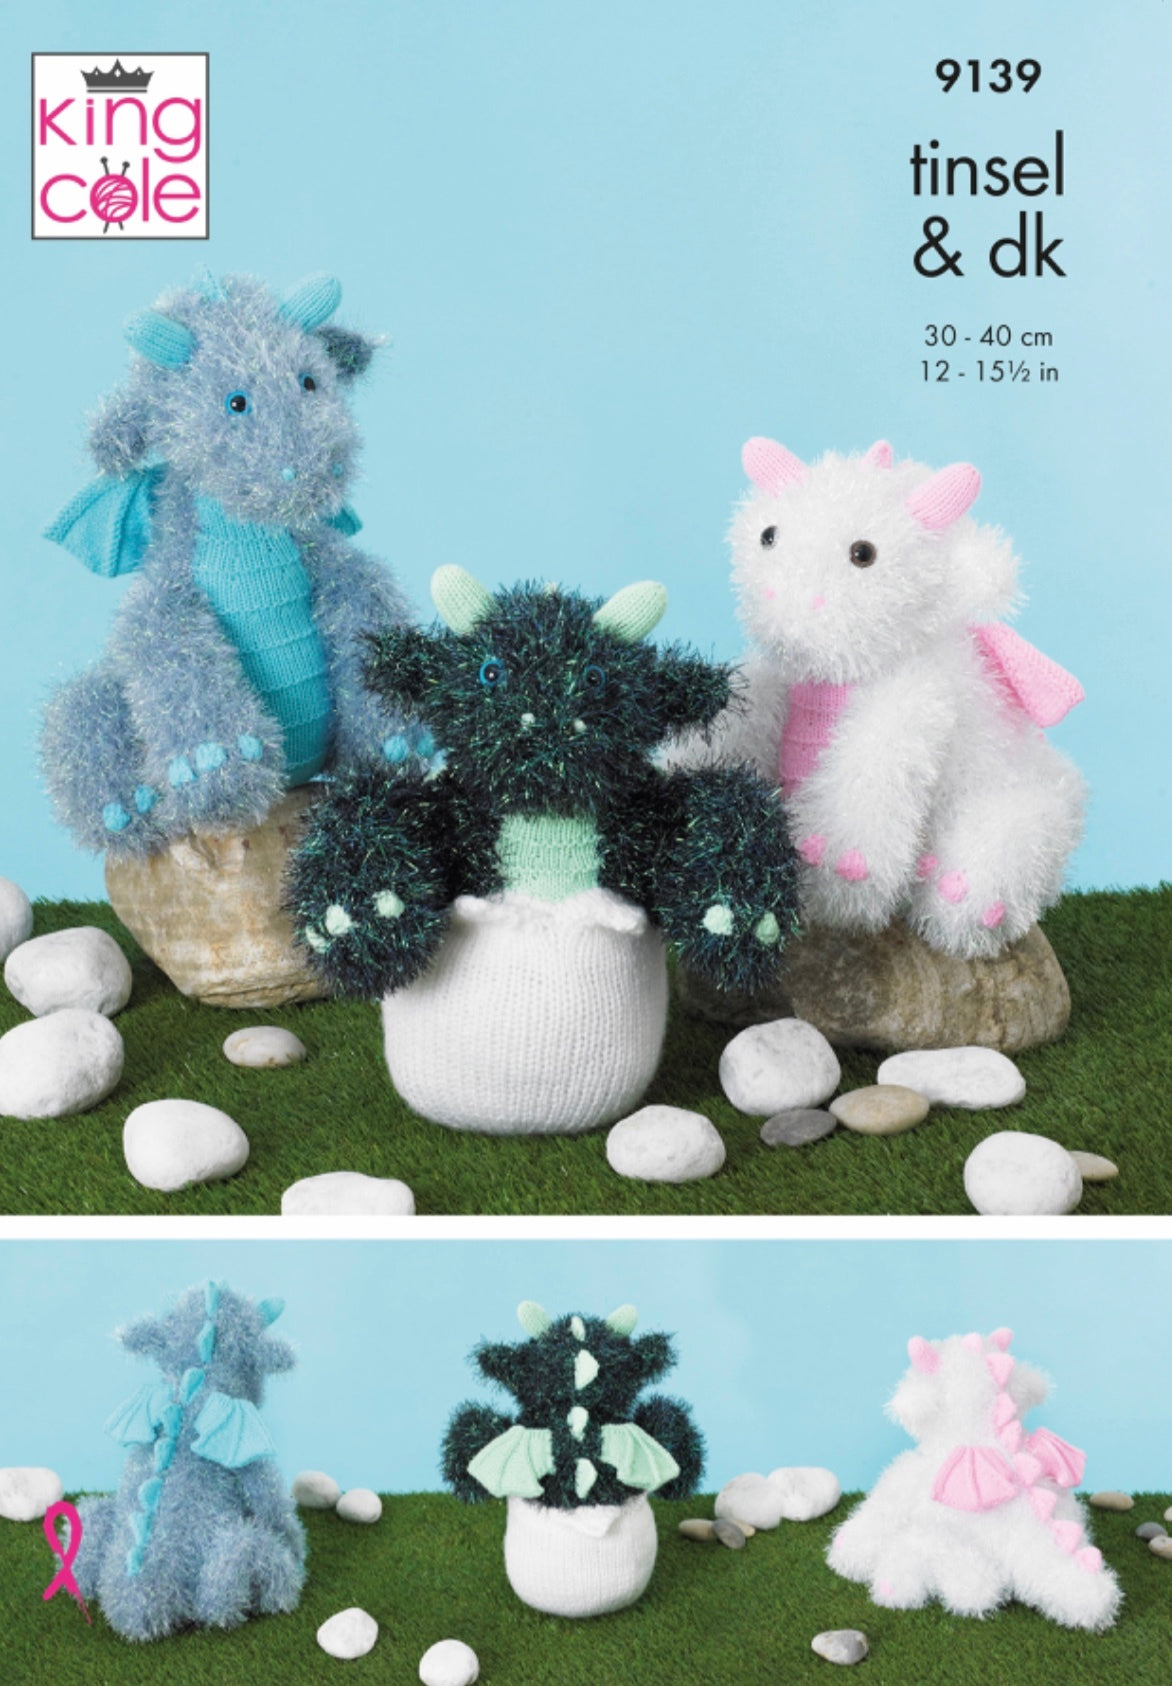 King Cole Pattern 9139 Knitting Pattern Toy Baby Dragons in tinsel chunky & dk